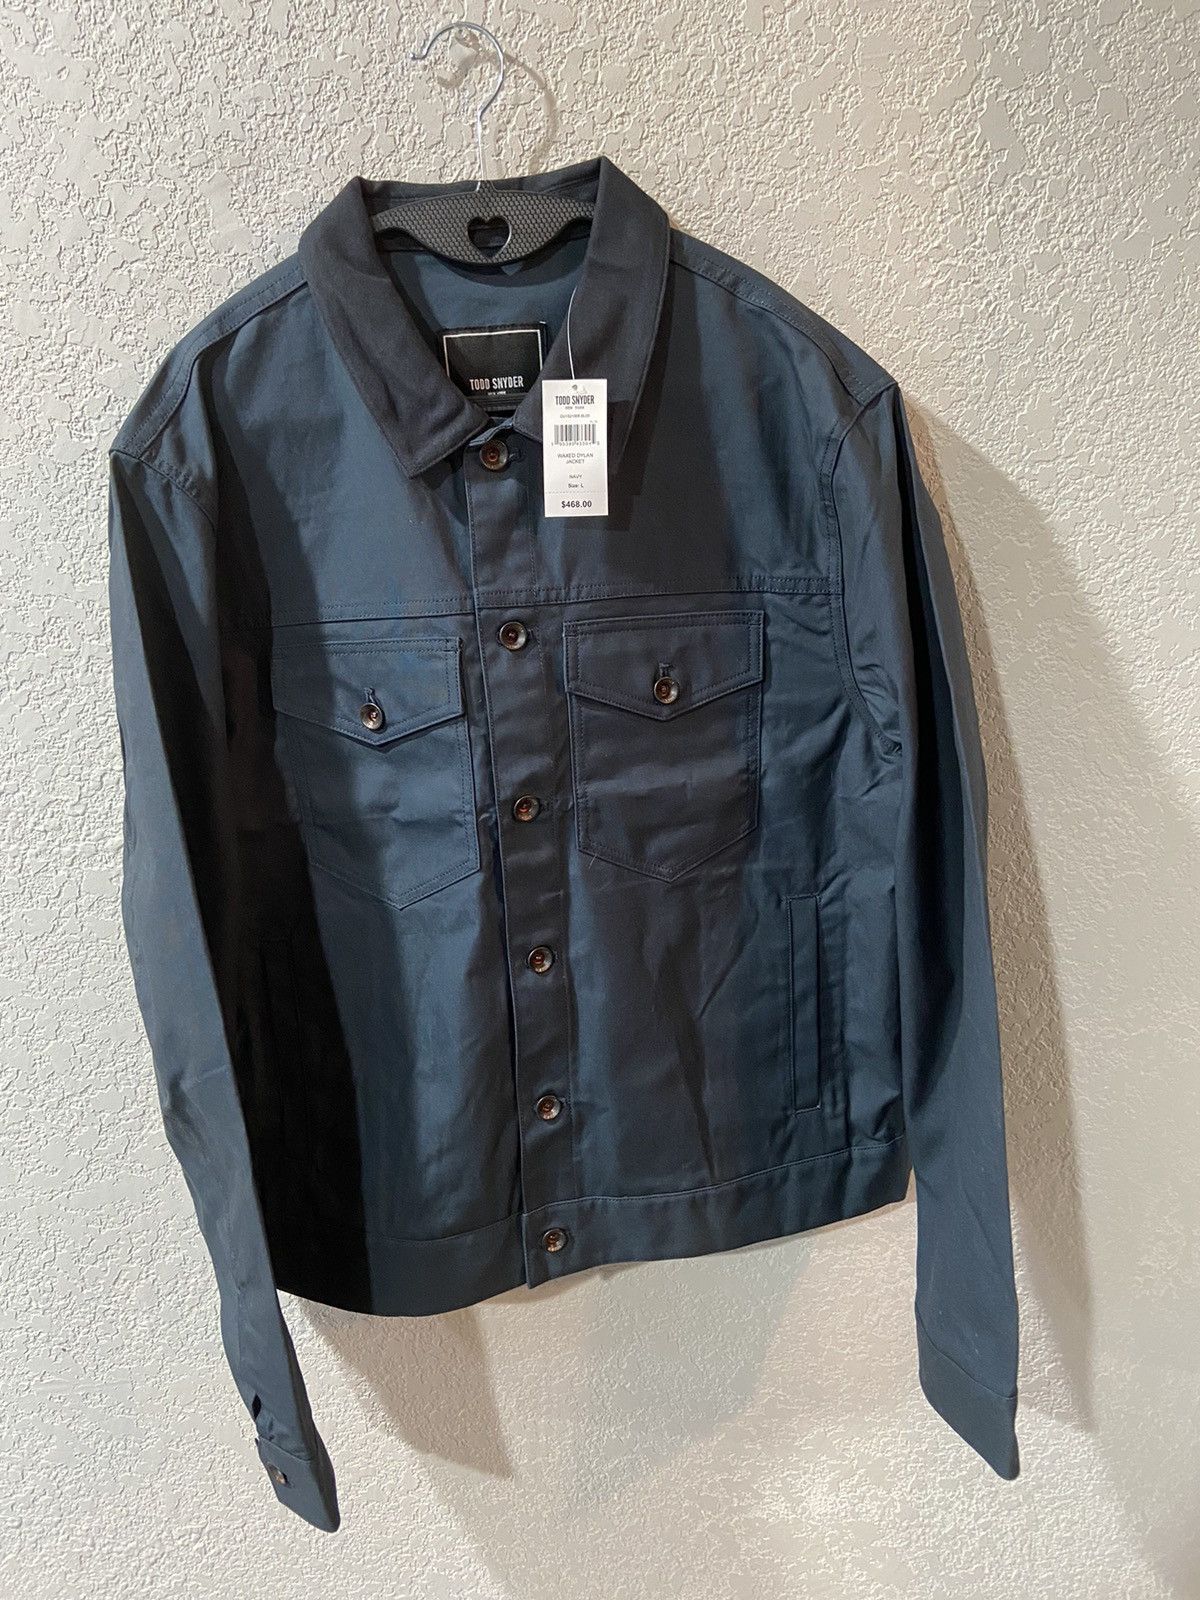 Todd Snyder Waxed Dylan Jacket in Navy | Grailed